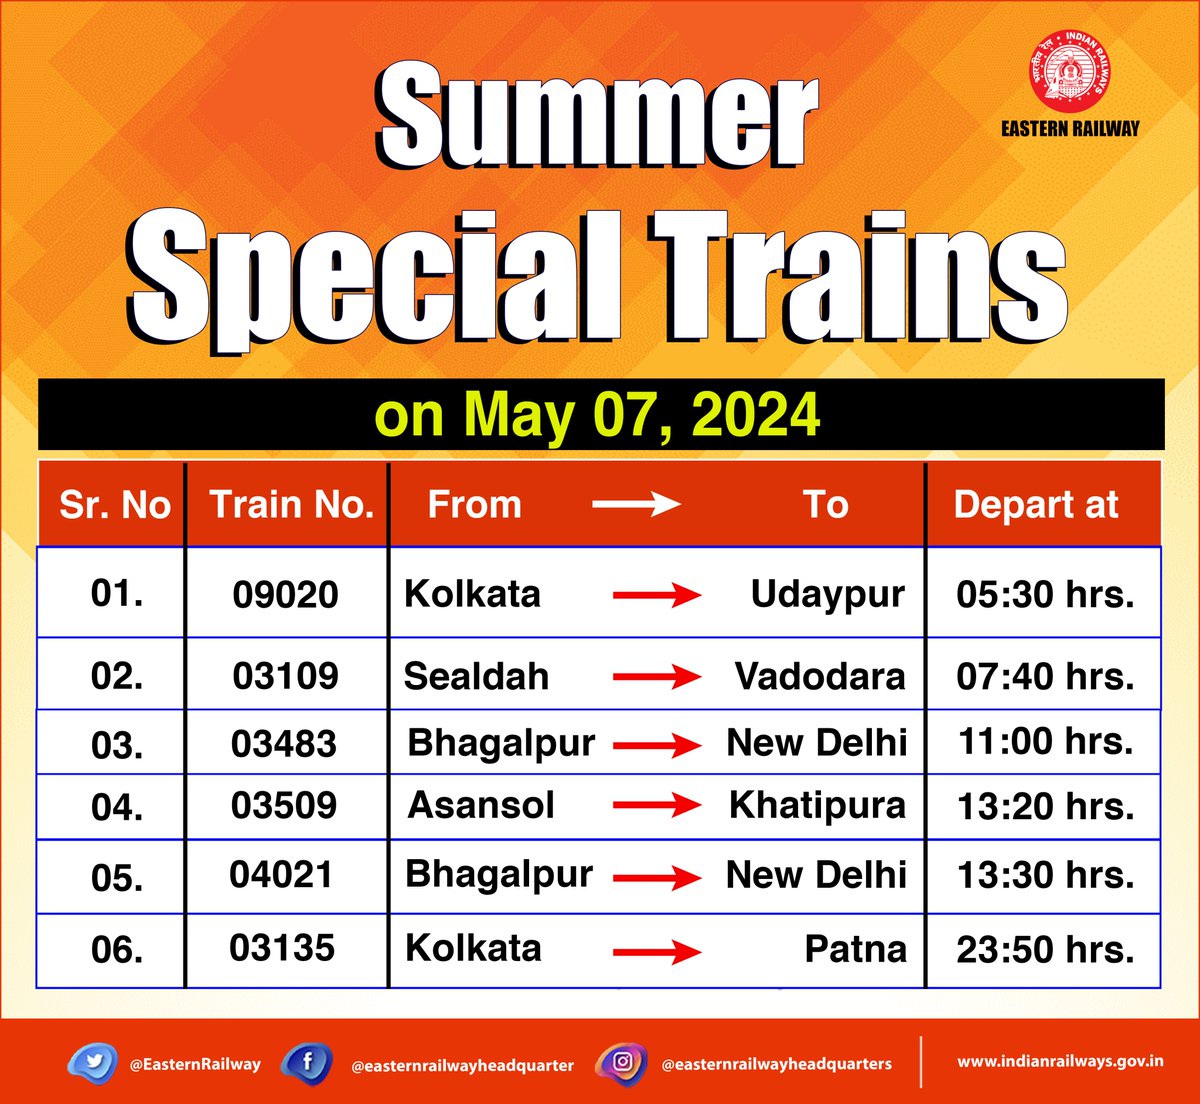 Summer Special Trains on May 07, 2024